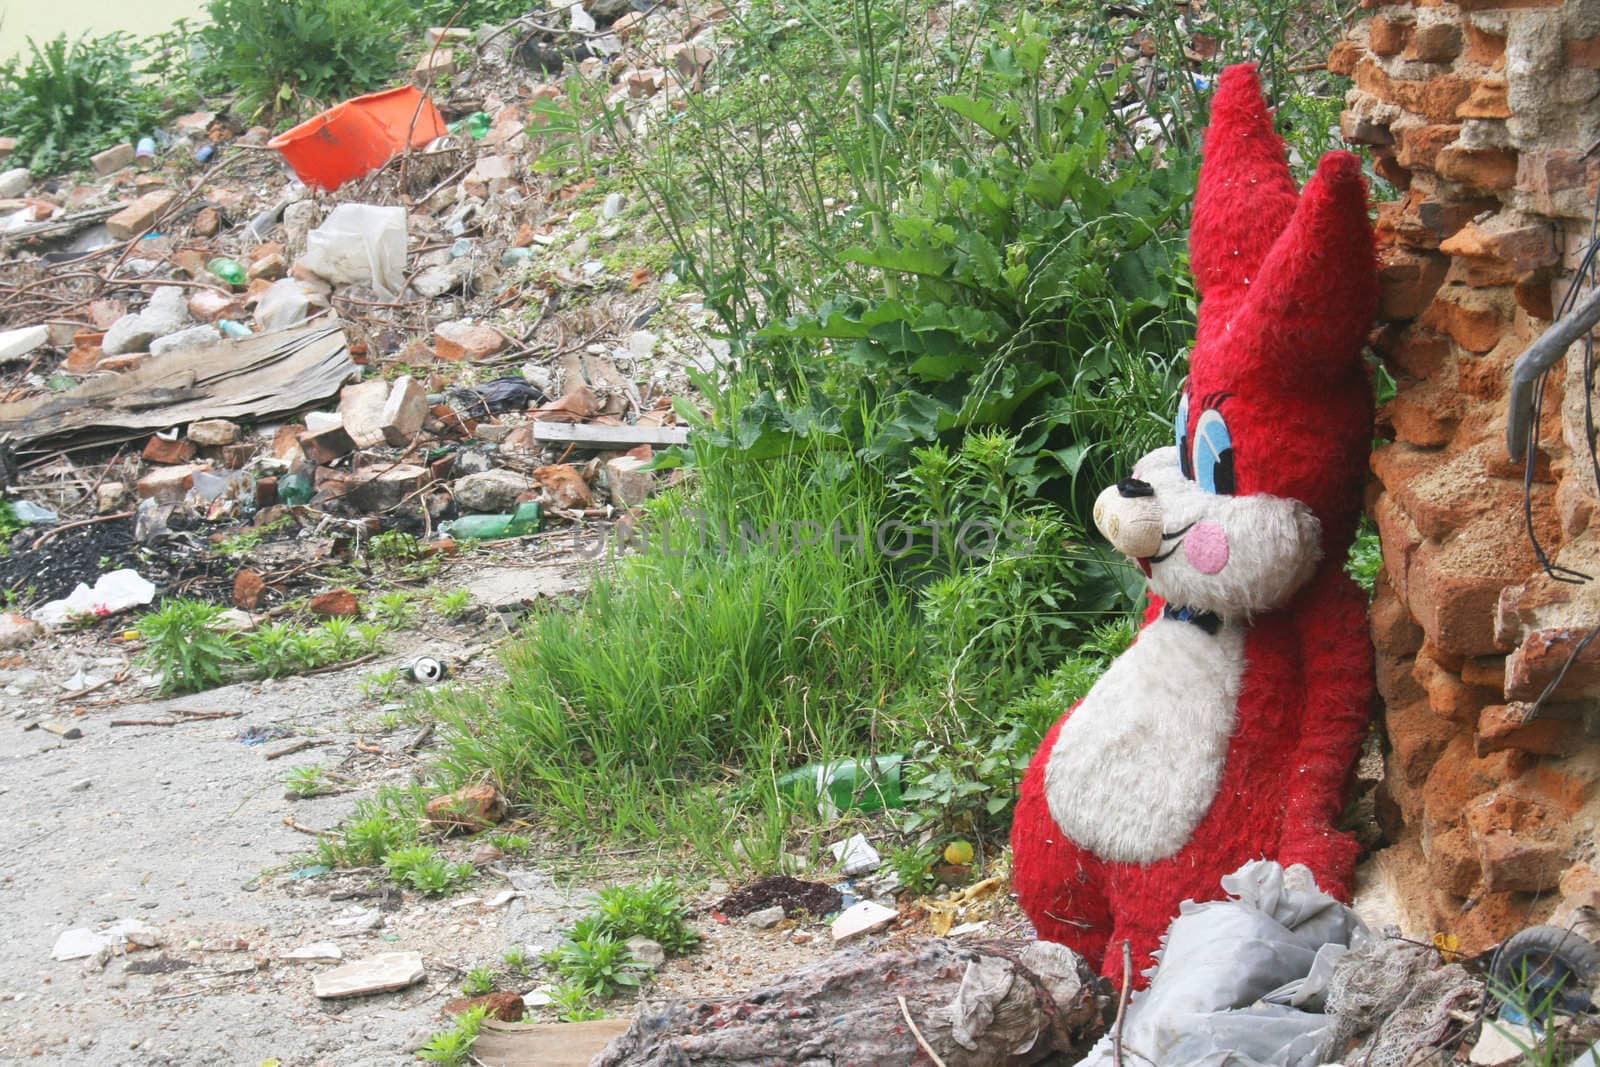 Giant red stuffed bunny in garbage filled deserted city lot